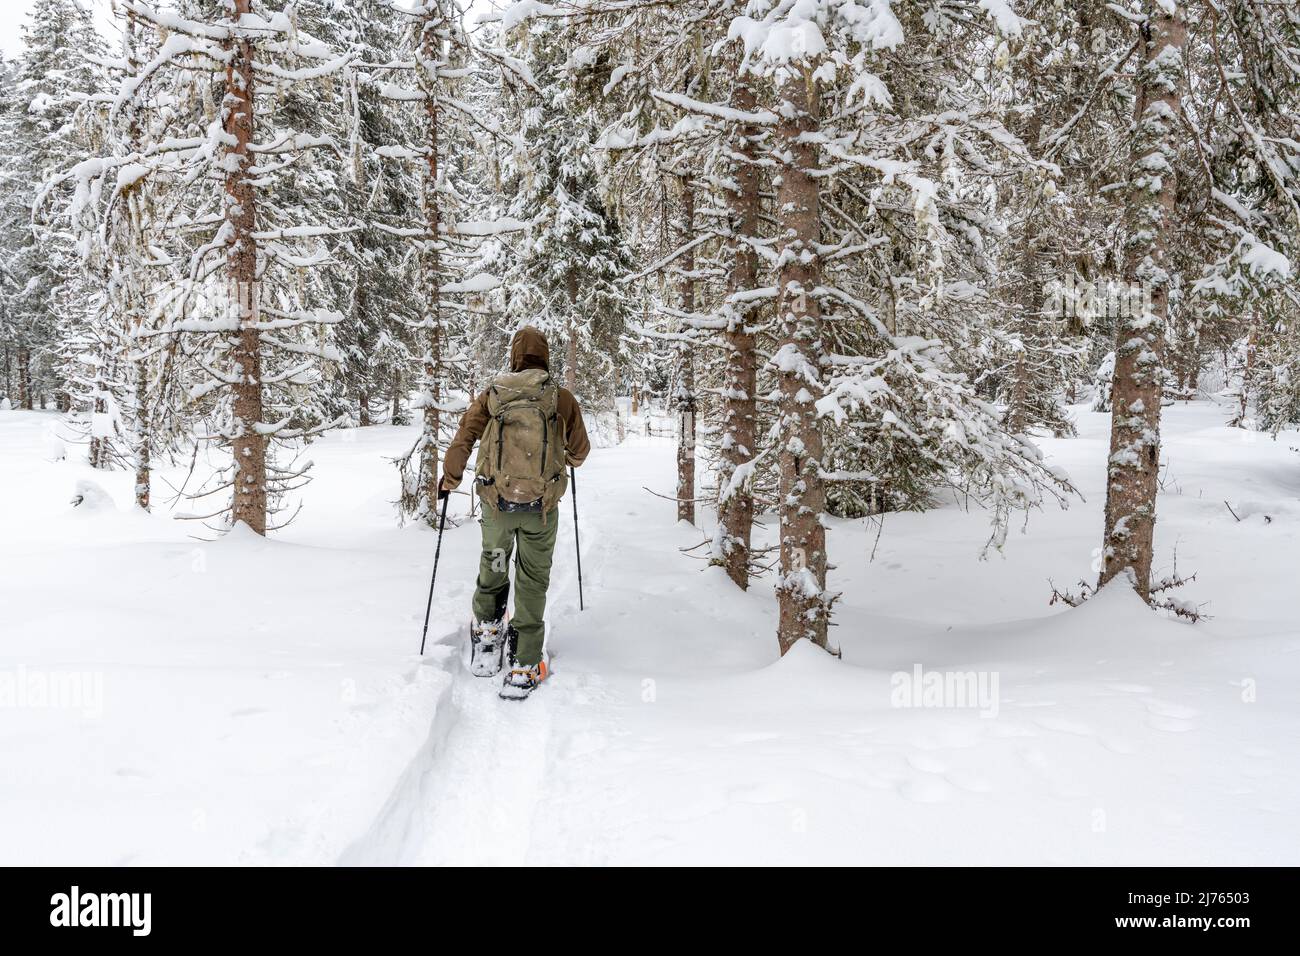 Winter in Karwendel, a hiker (self-portrait) with a large backpack walks through a dense forest with spruce trees, following a trail. Stock Photo